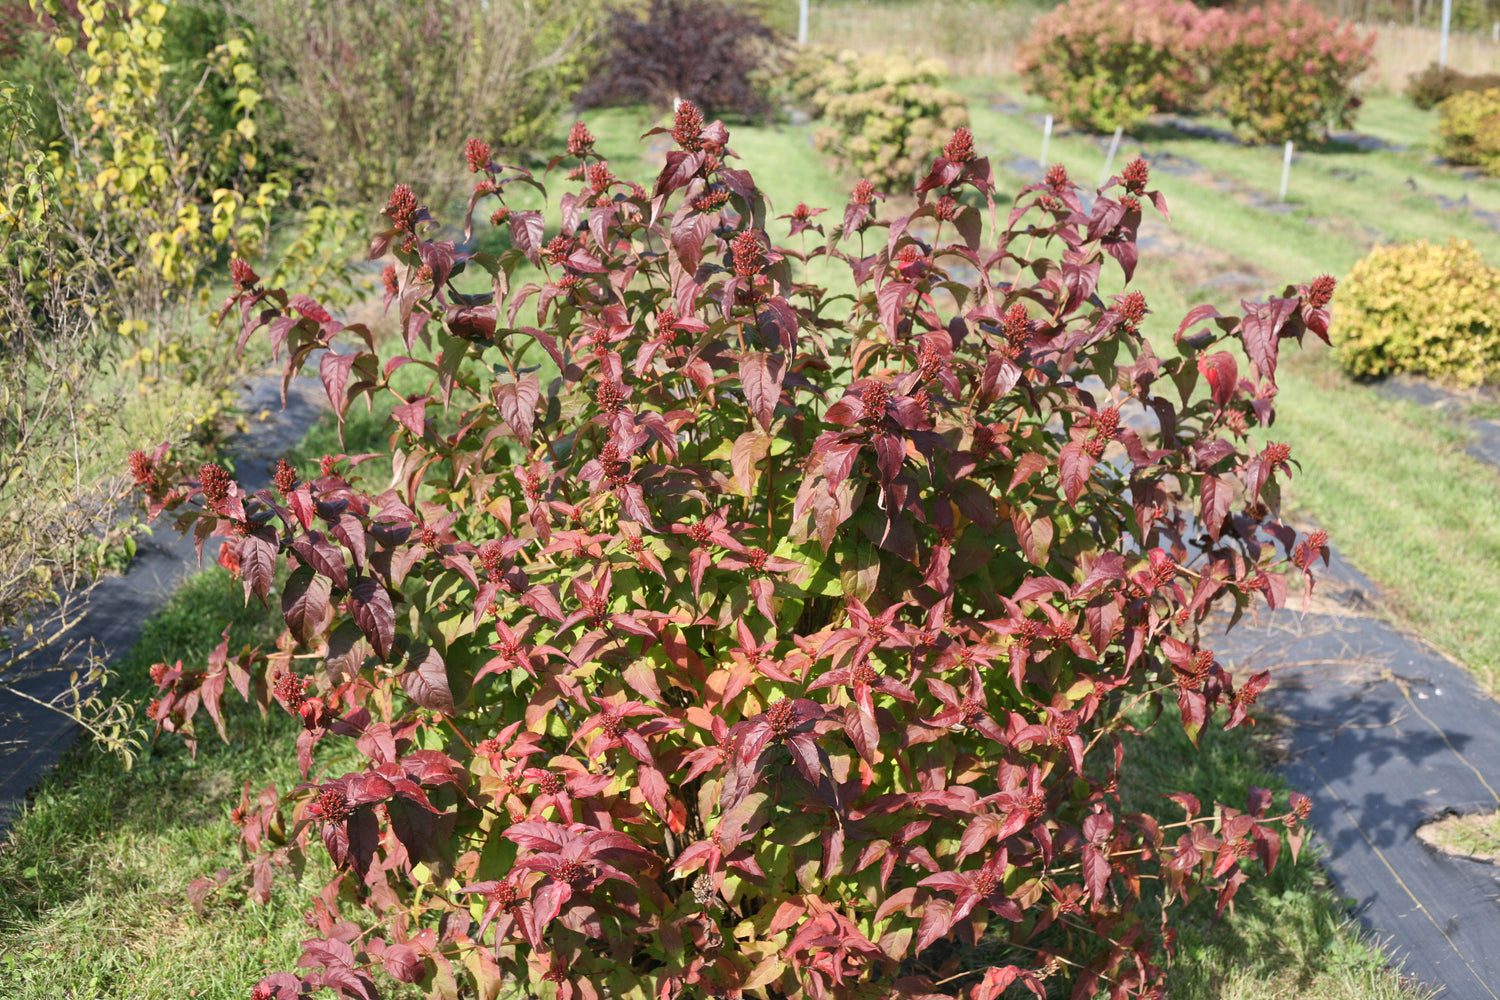 Kodiak Black diervilla in autumn, showing its red seed heads and red fall color on its foliage.